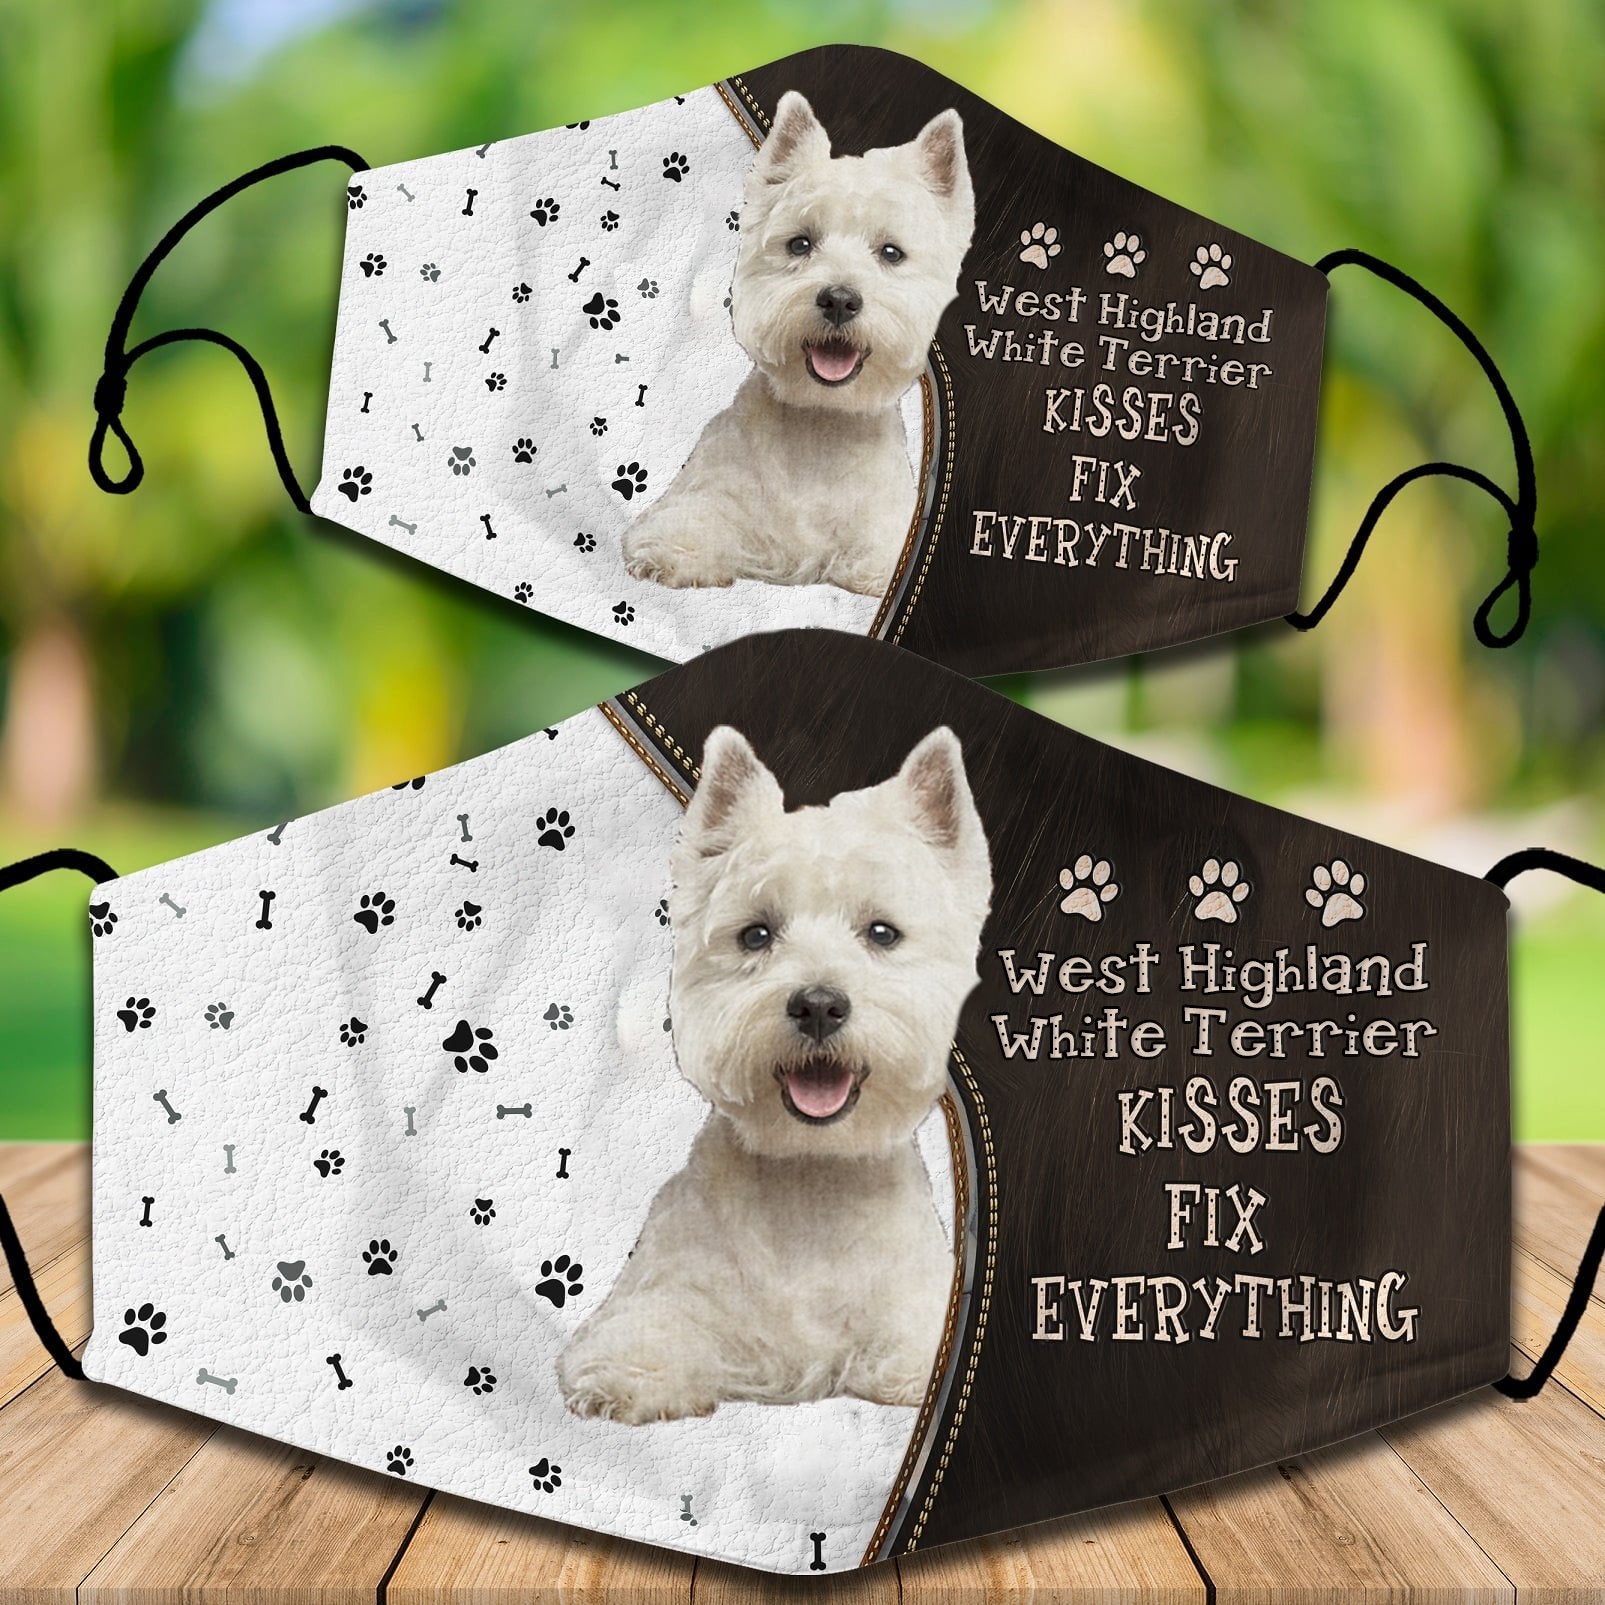 West Highland White Terrier Kisses Fix Everything Veil